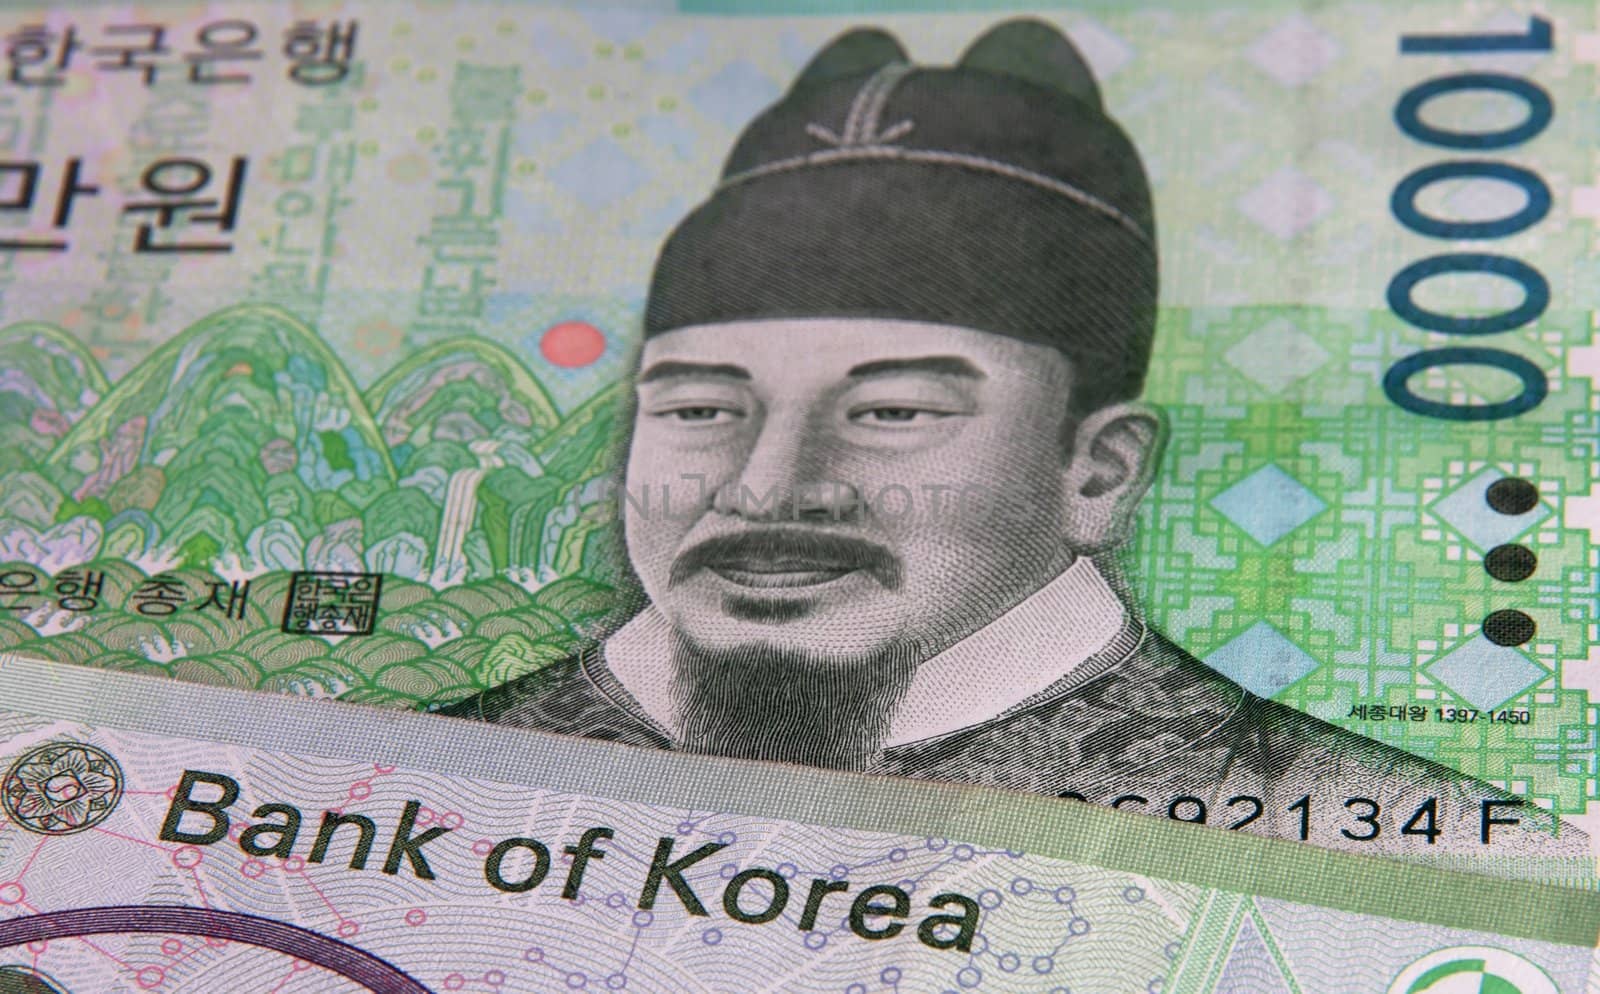 Korean Won with Bank of Korea by clickbeetle